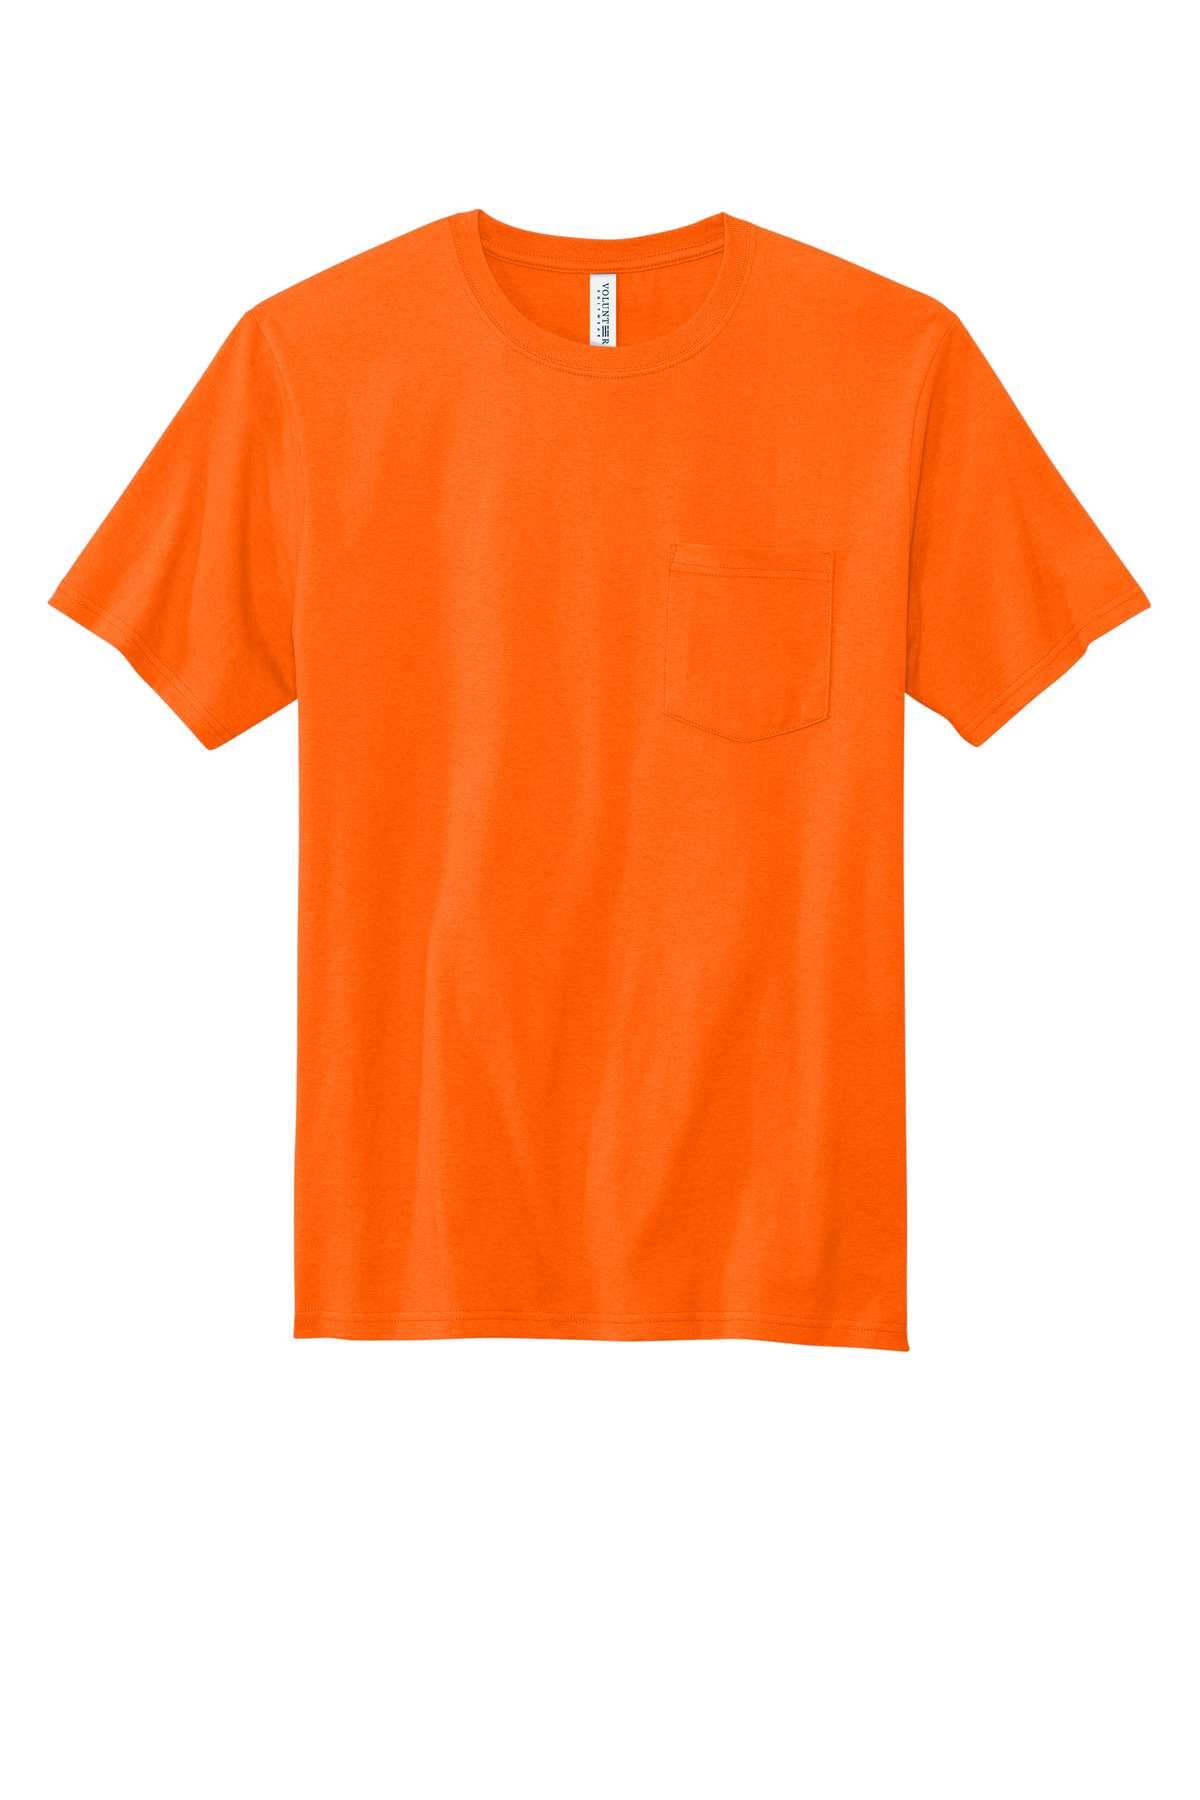 Selected Color is Safety Orange